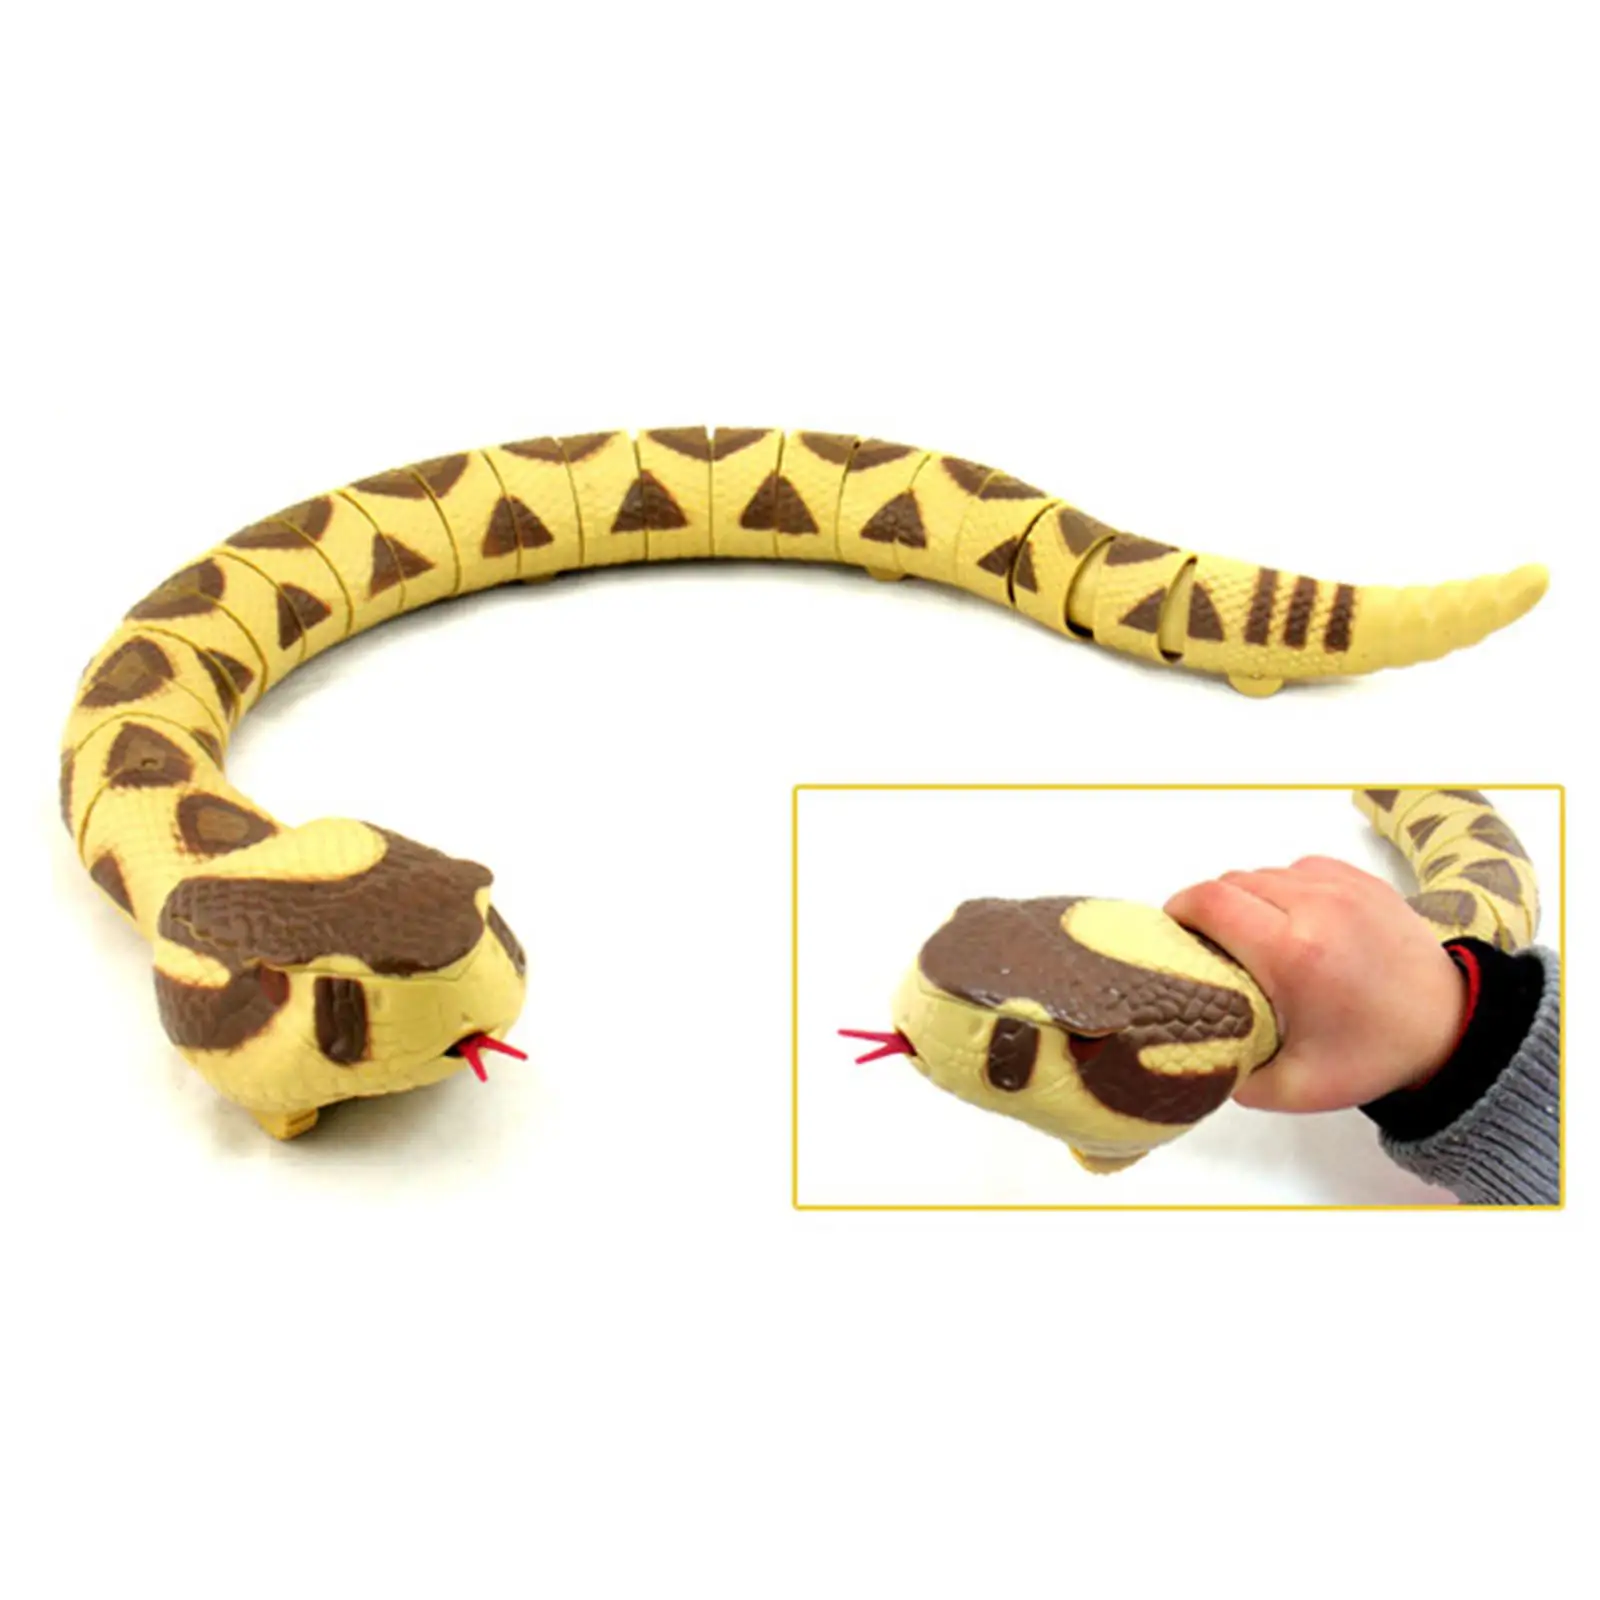 Realistic RC Snake Toys Halloween Tricks Toy Artifical Snake Model for Party